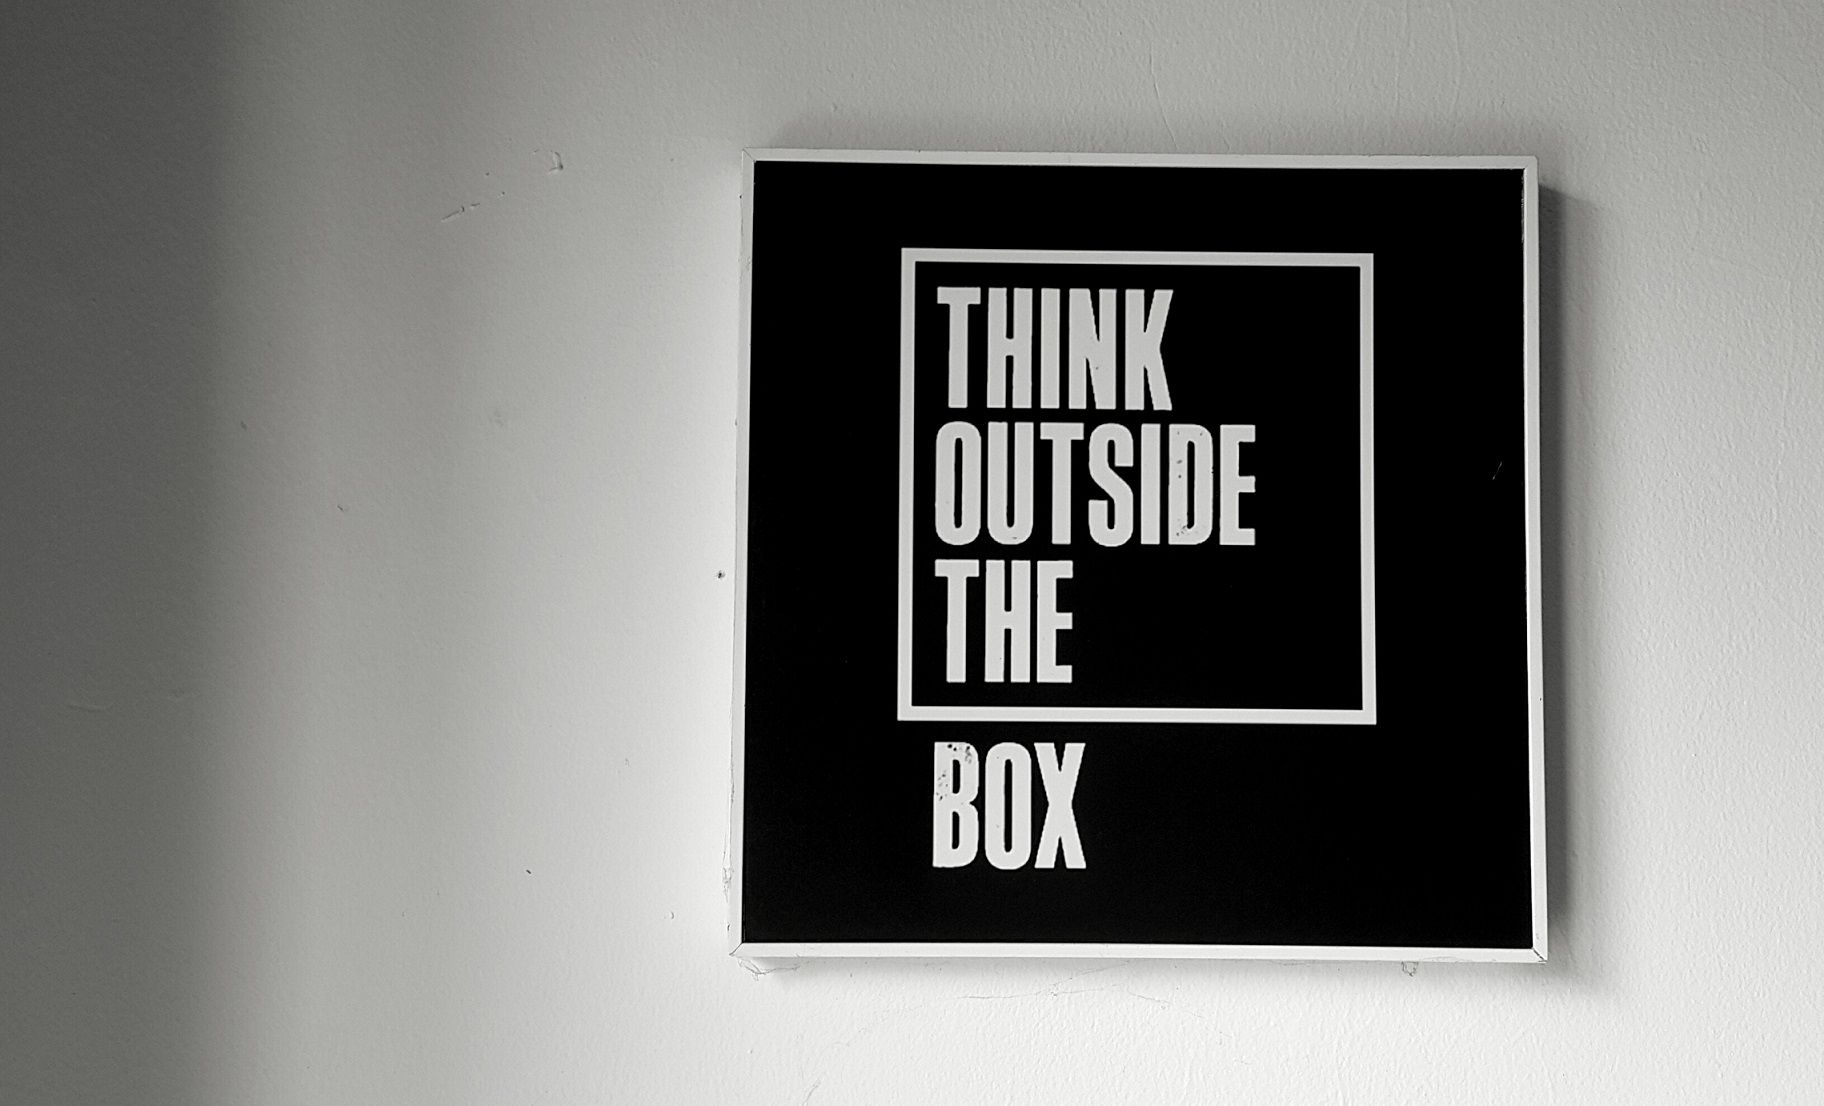 sign that says "Think Outside the Box"